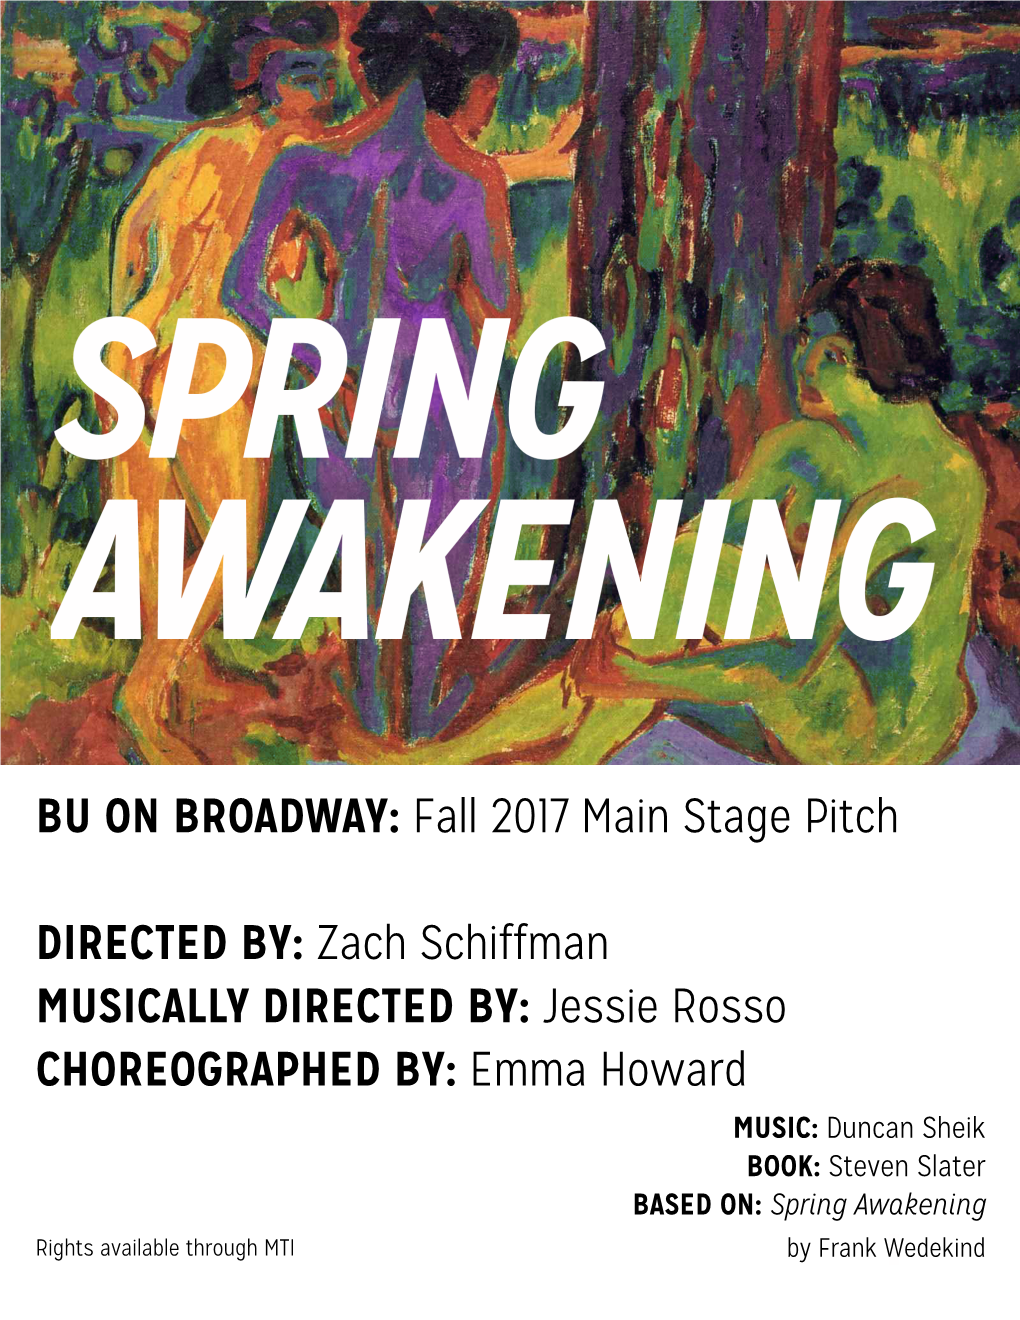 Fall 2017 Main Stage Pitch DIRECTED BY: Zach Schiffman MUSICALLY DIRECTED BY: Jessie Rosso CHOREOGRAPHED BY